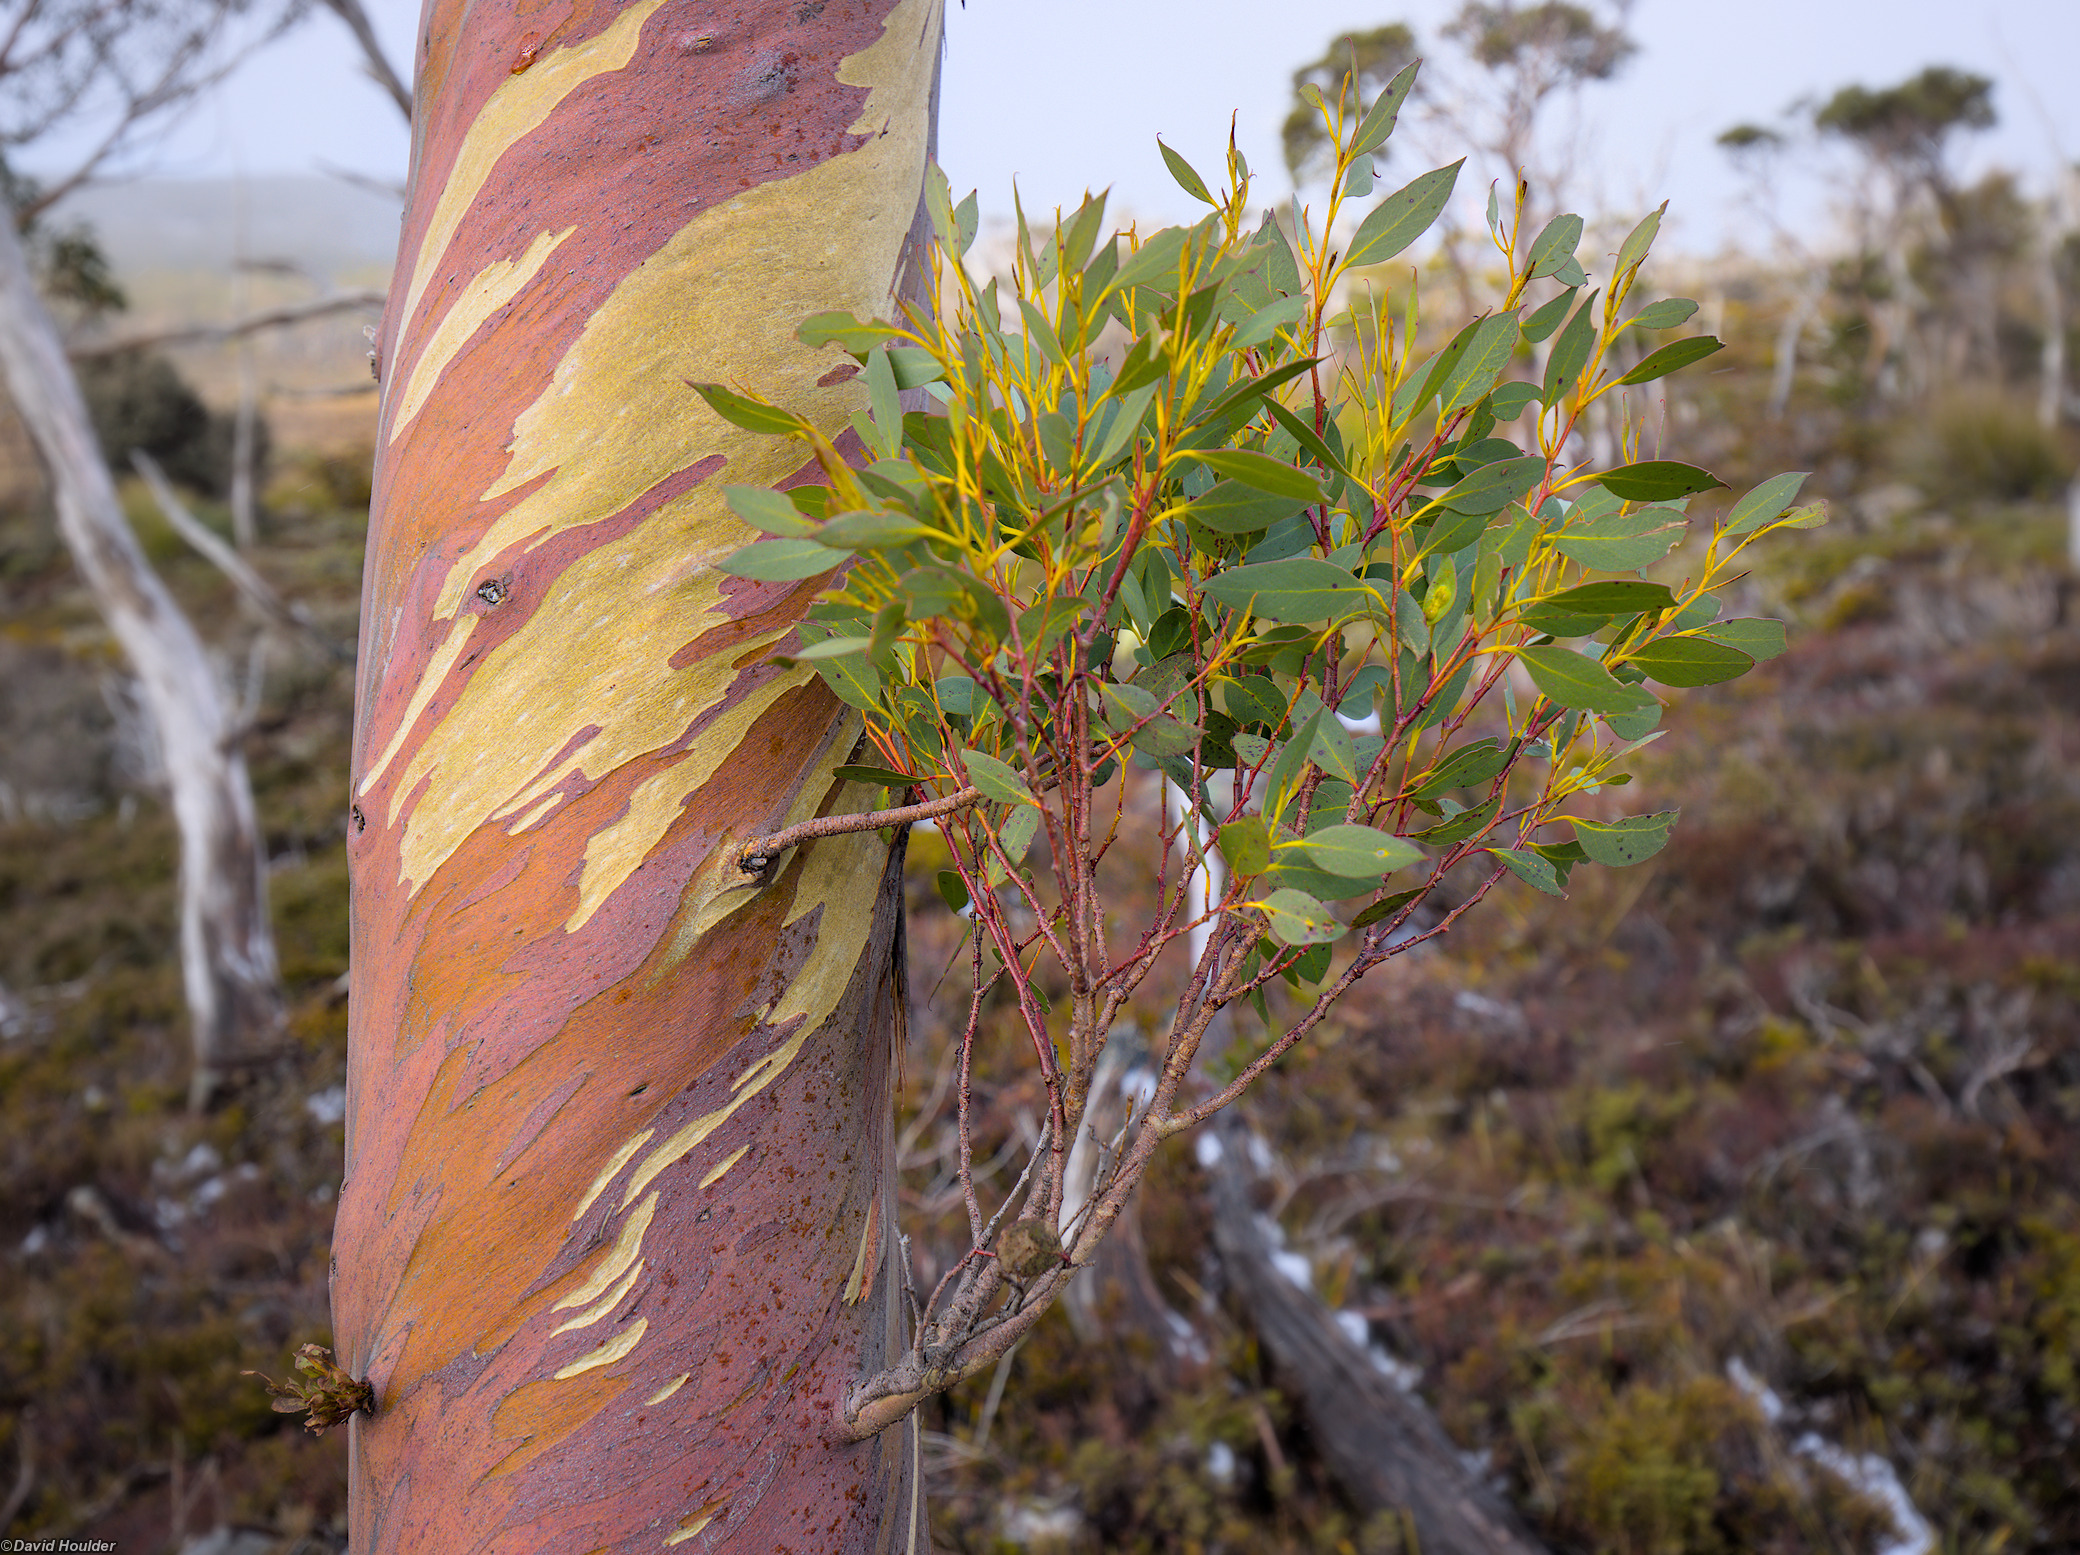 Sprouting leaves on a snowgum